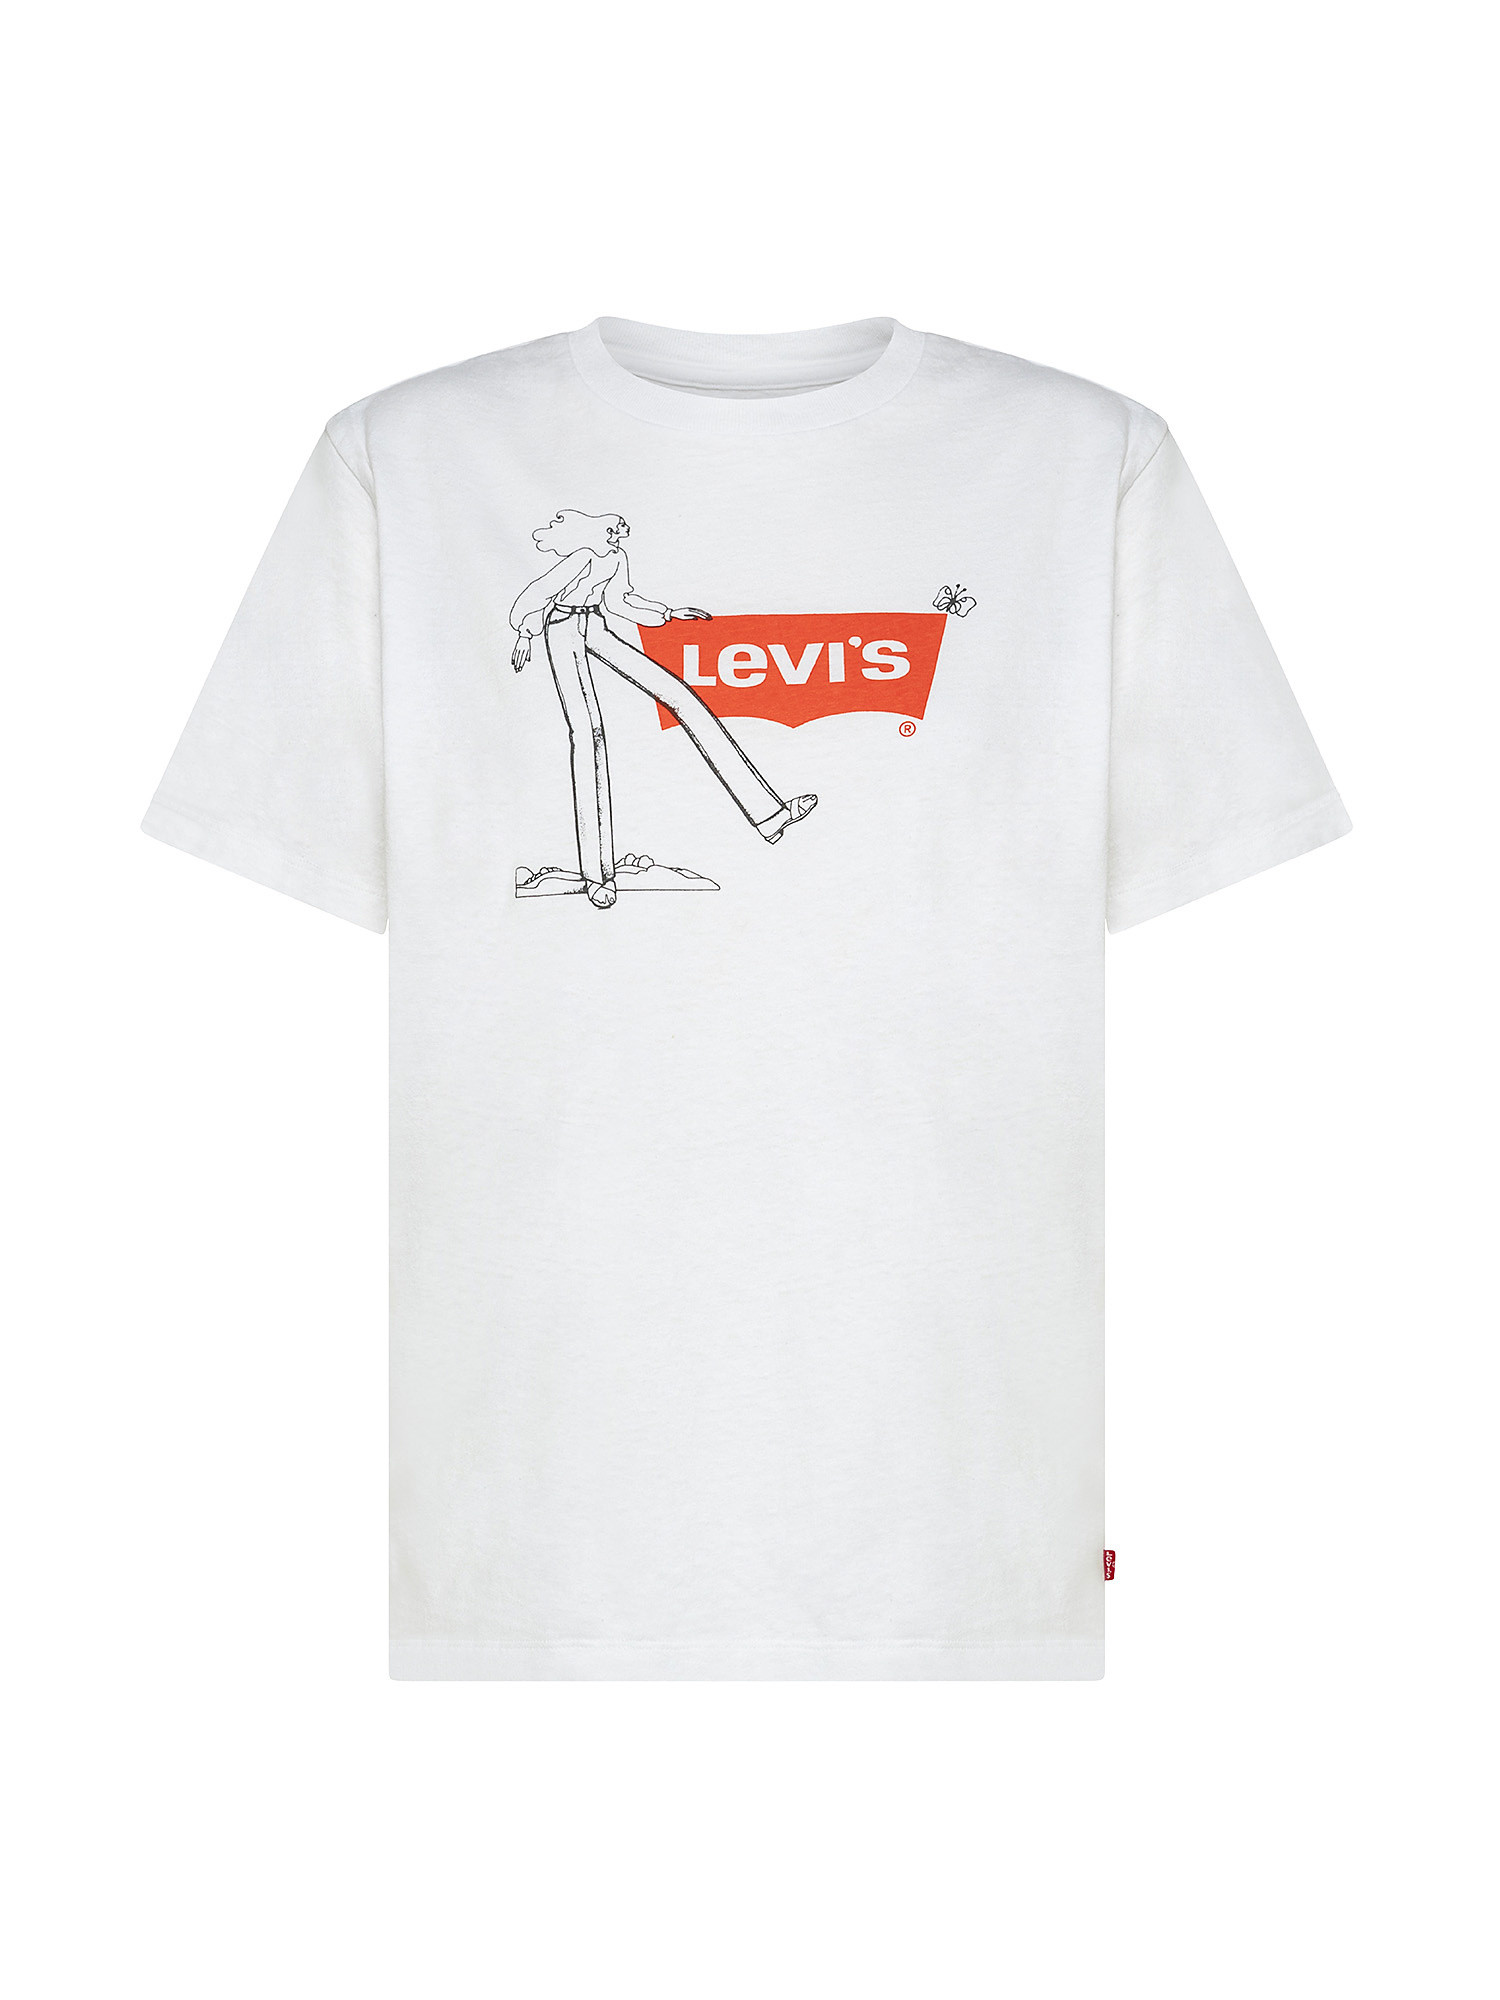 Graphic Jet Tee T-shirt, White, large image number 0